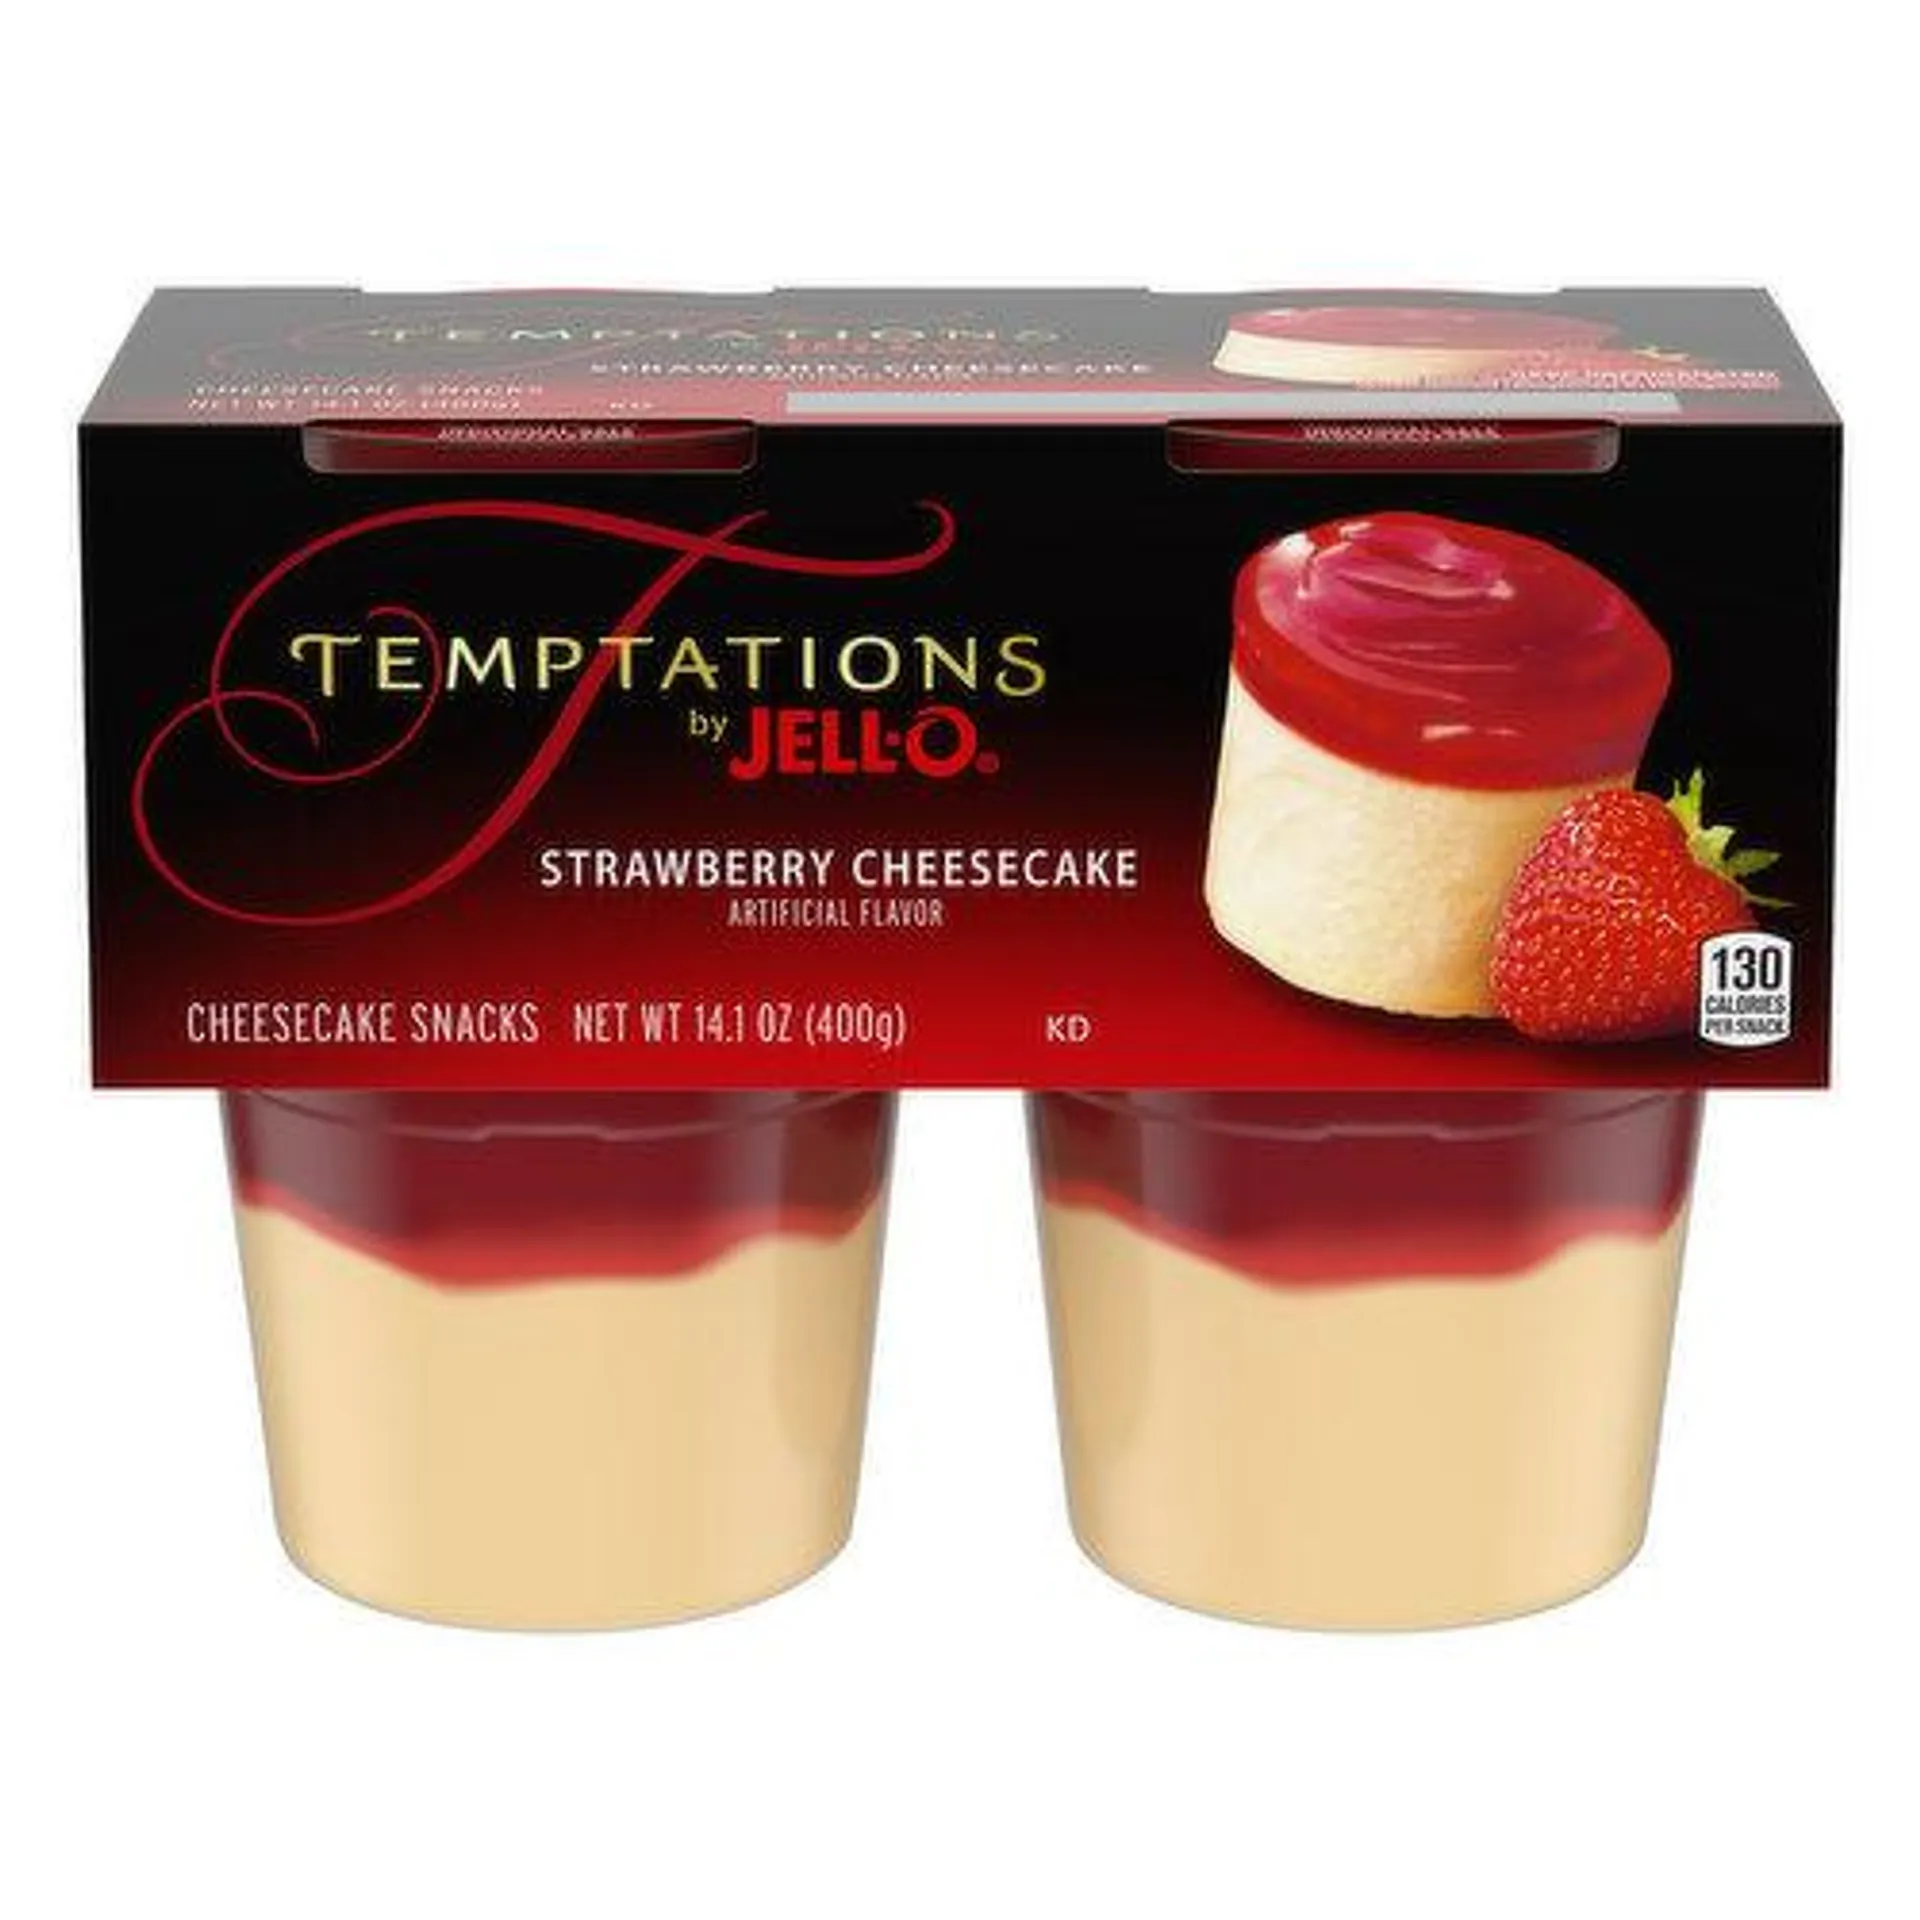 JELL-O Temptations Ready to Eat Strawberry Cheesecake Pudding Snack - 14.1 Ounce